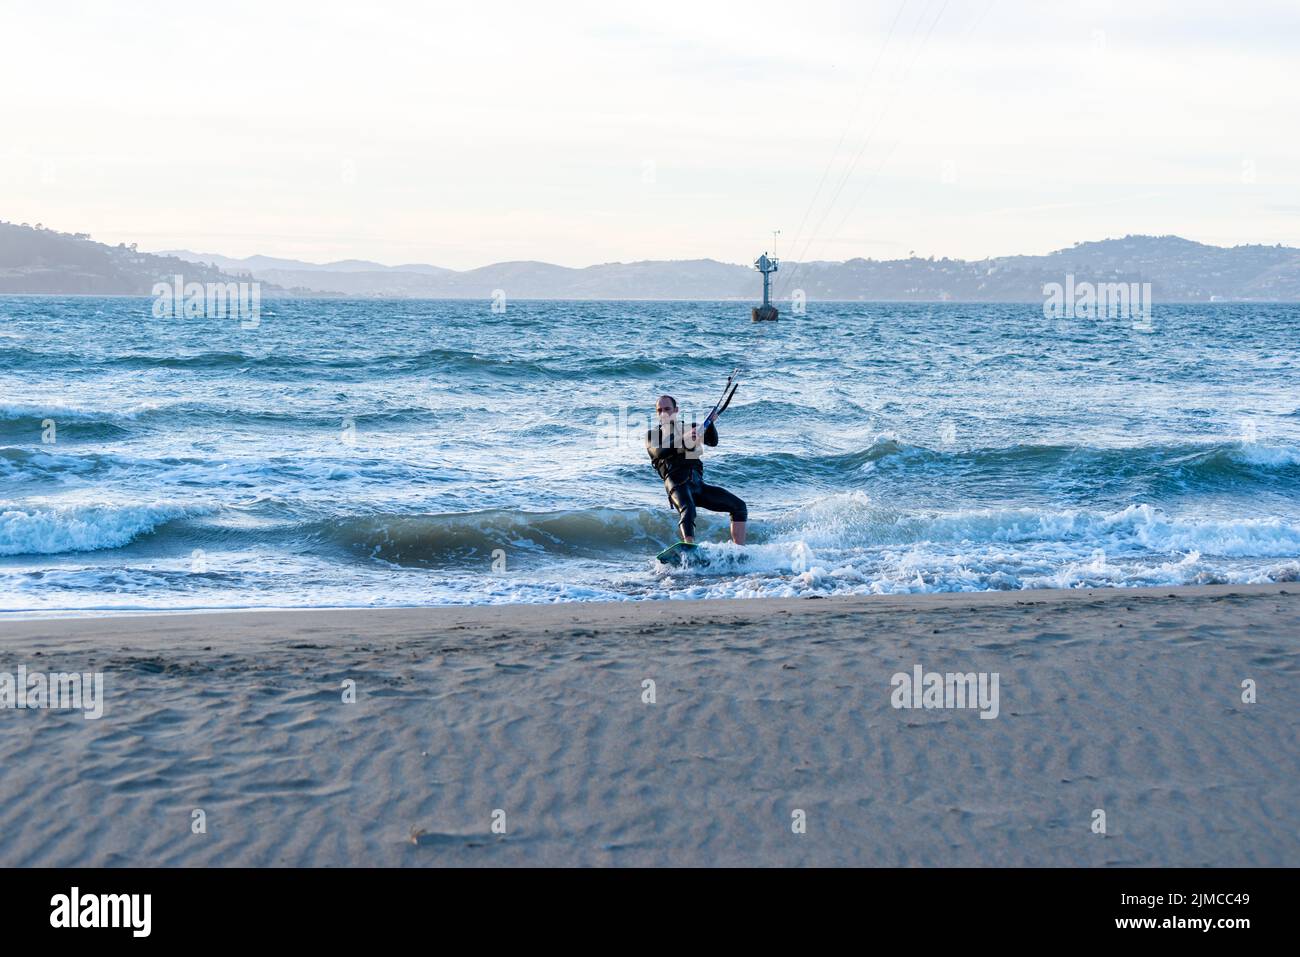 Male kitesurfer near the edge of a body of water with blue water and hills in the distance Stock Photo